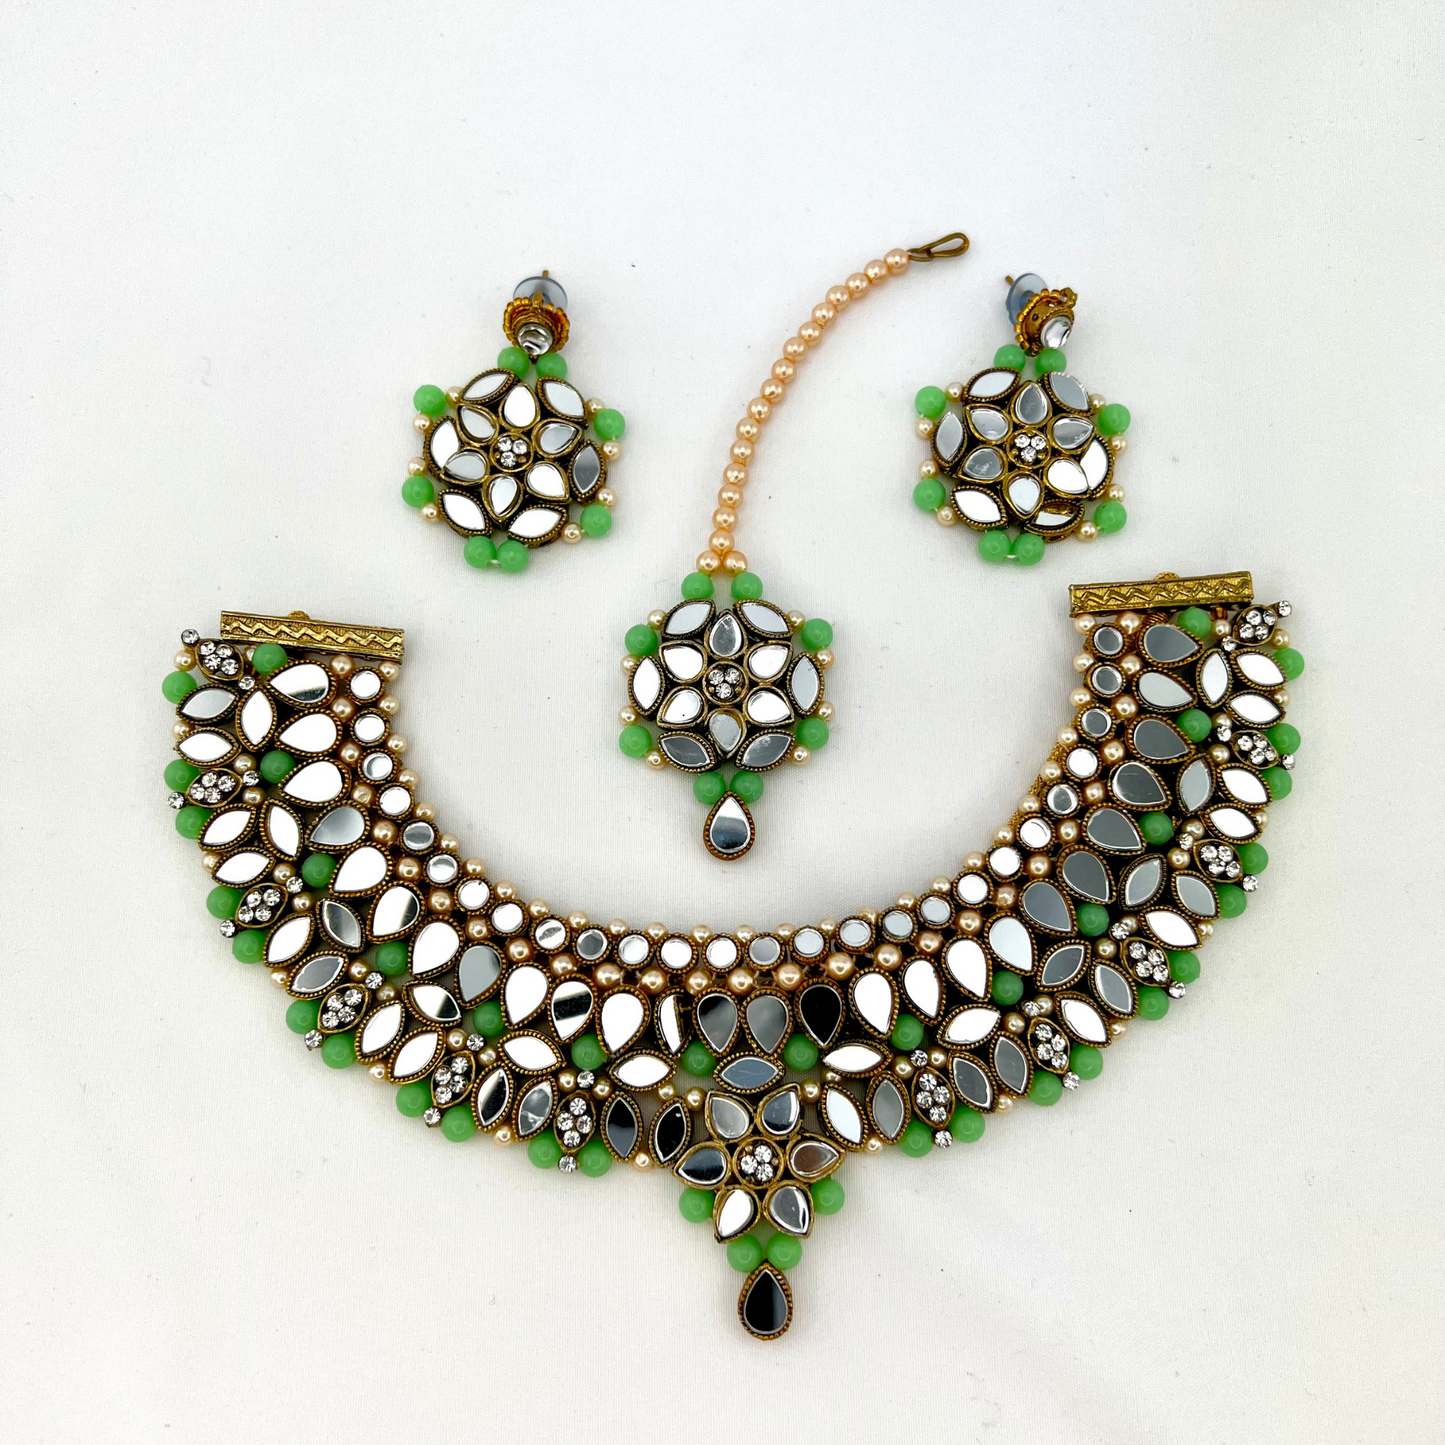 Mirror necklace set with green beads, clear stones and pearls.  Set includes, necklace, tikka and earrings.  Prefect for Indian weddings, parties and special occasions.  Latest 2022 fashion. High end Indian fashion jewellery with top quality stones and beads.